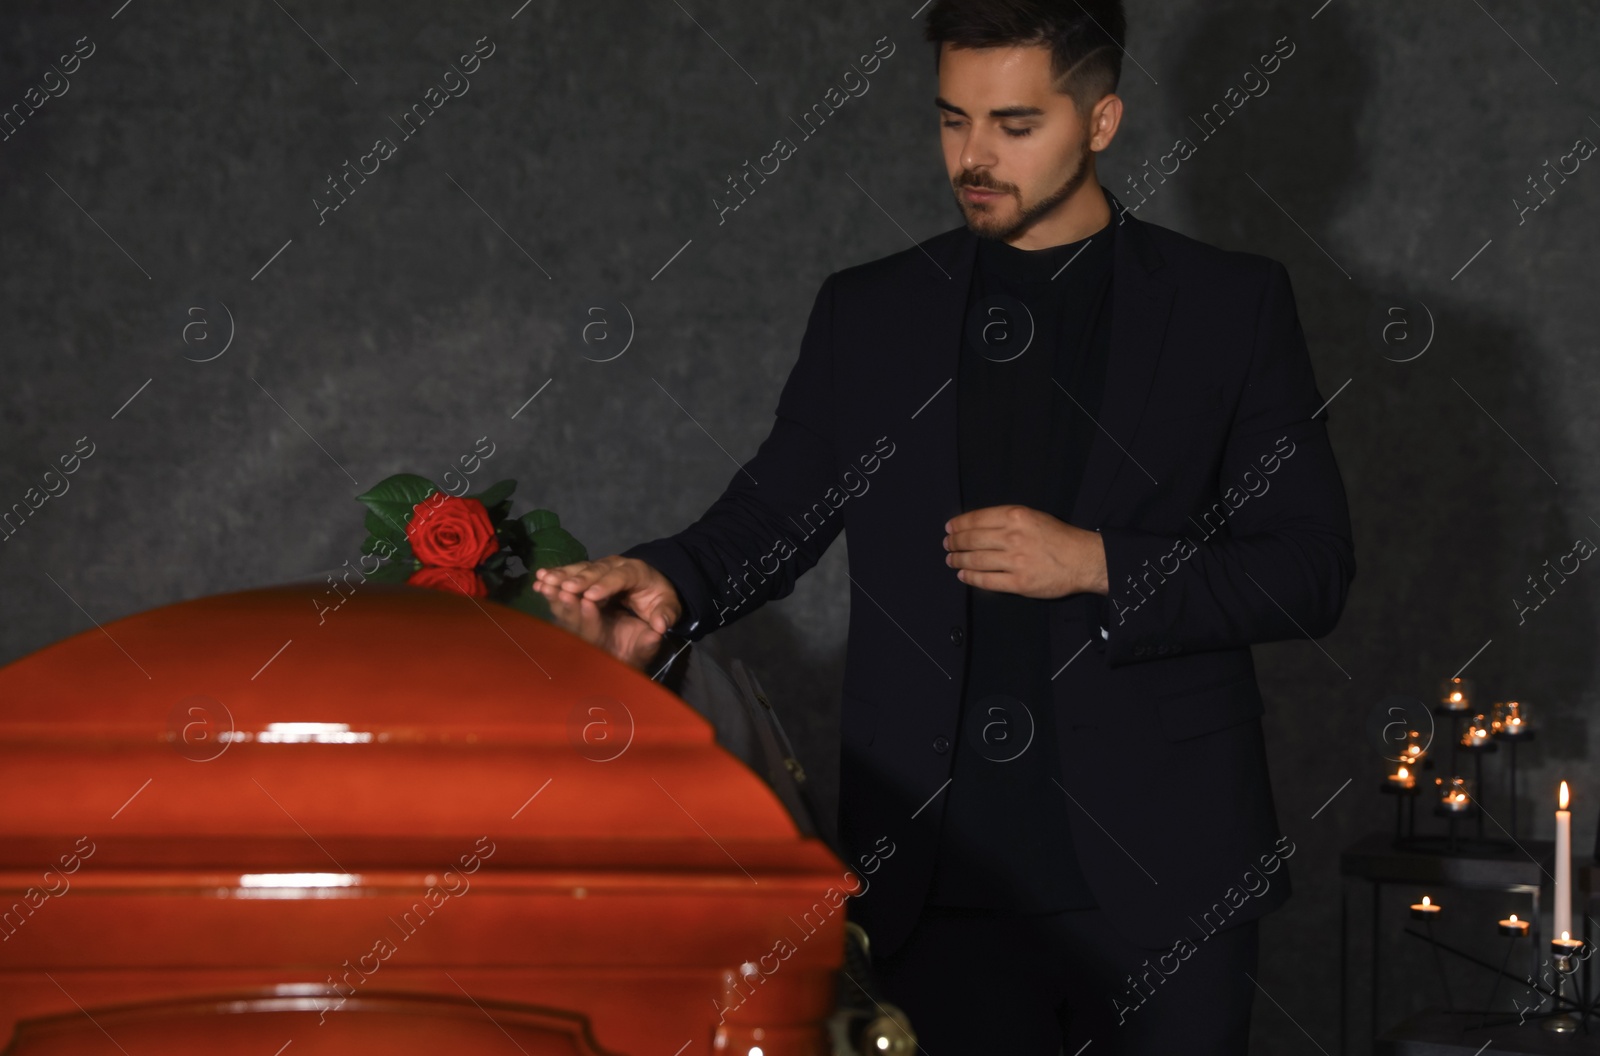 Photo of Sad young man near funeral casket with red rose in chapel